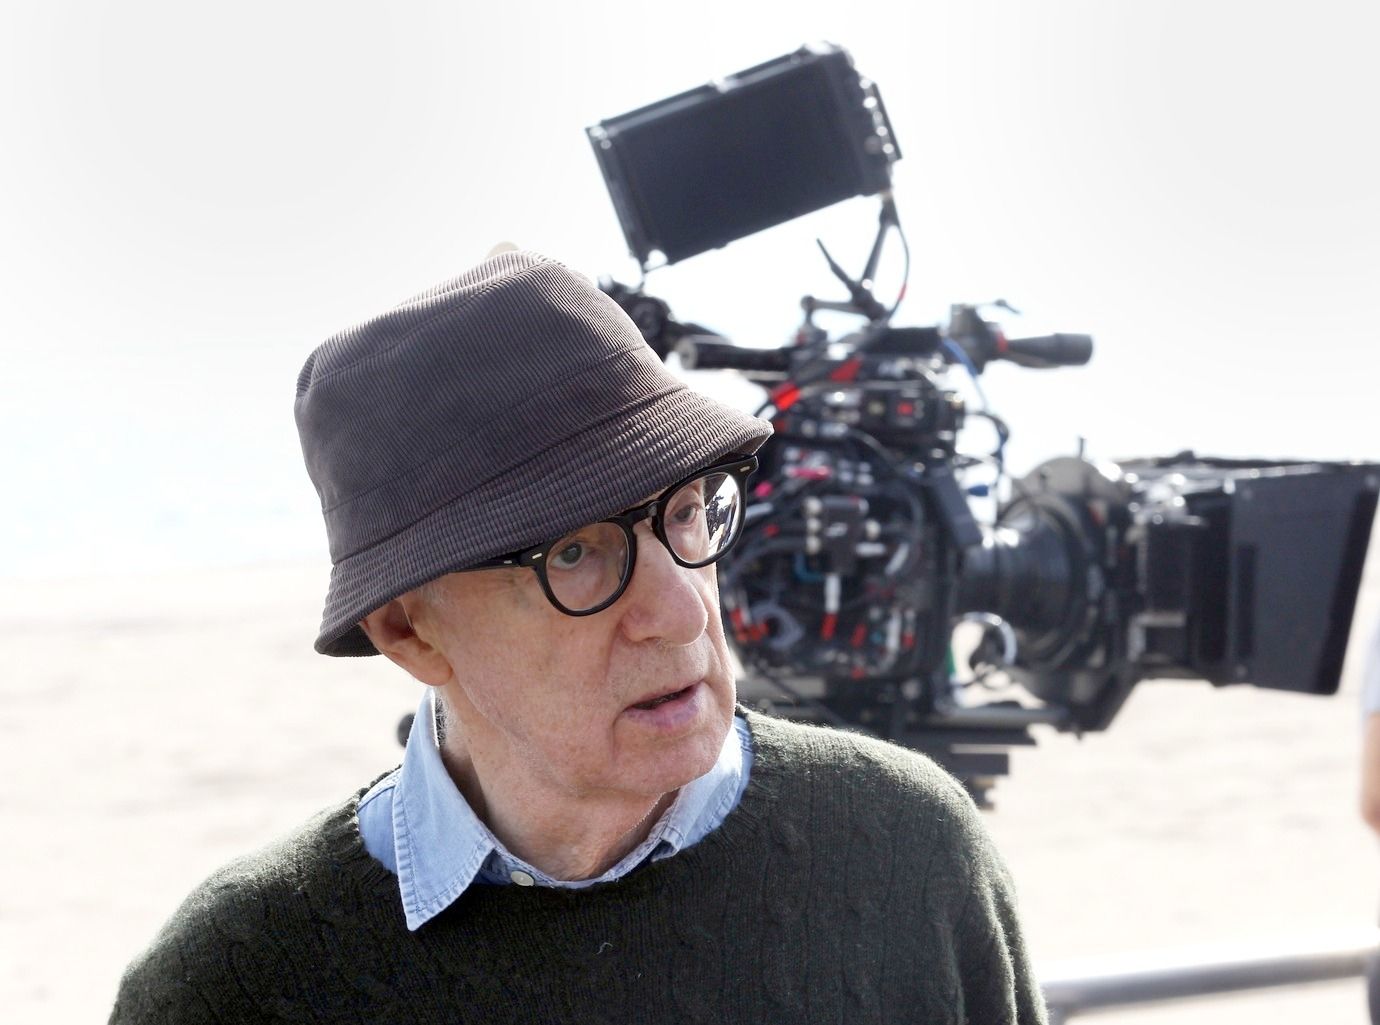 Woody Allen's newest film may never see the light of day